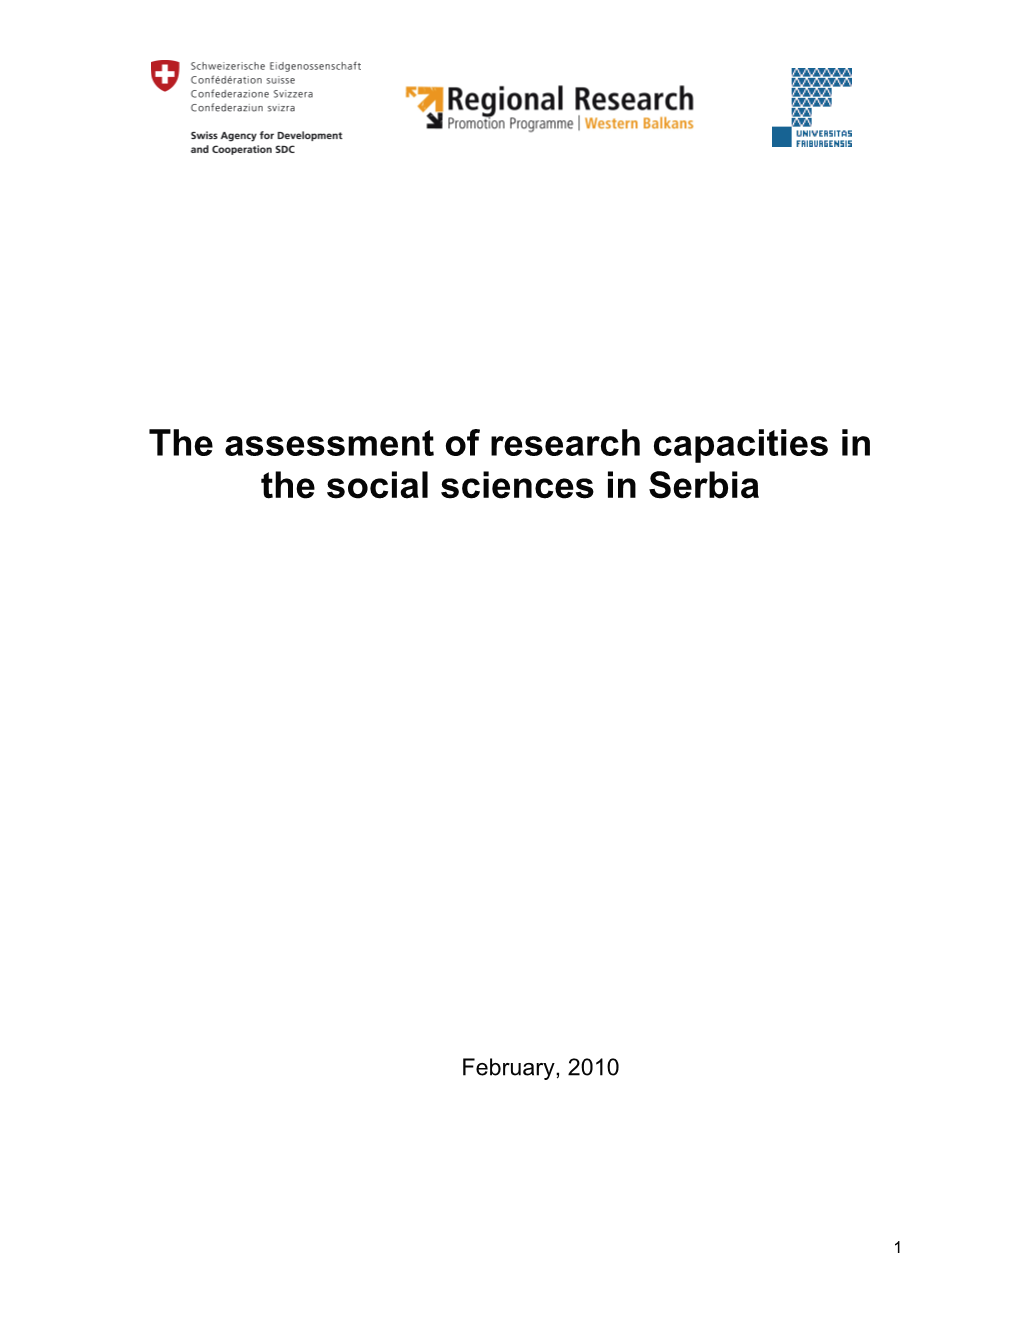 The Assessment of Research Capacities in the Social Sciences in Serbia